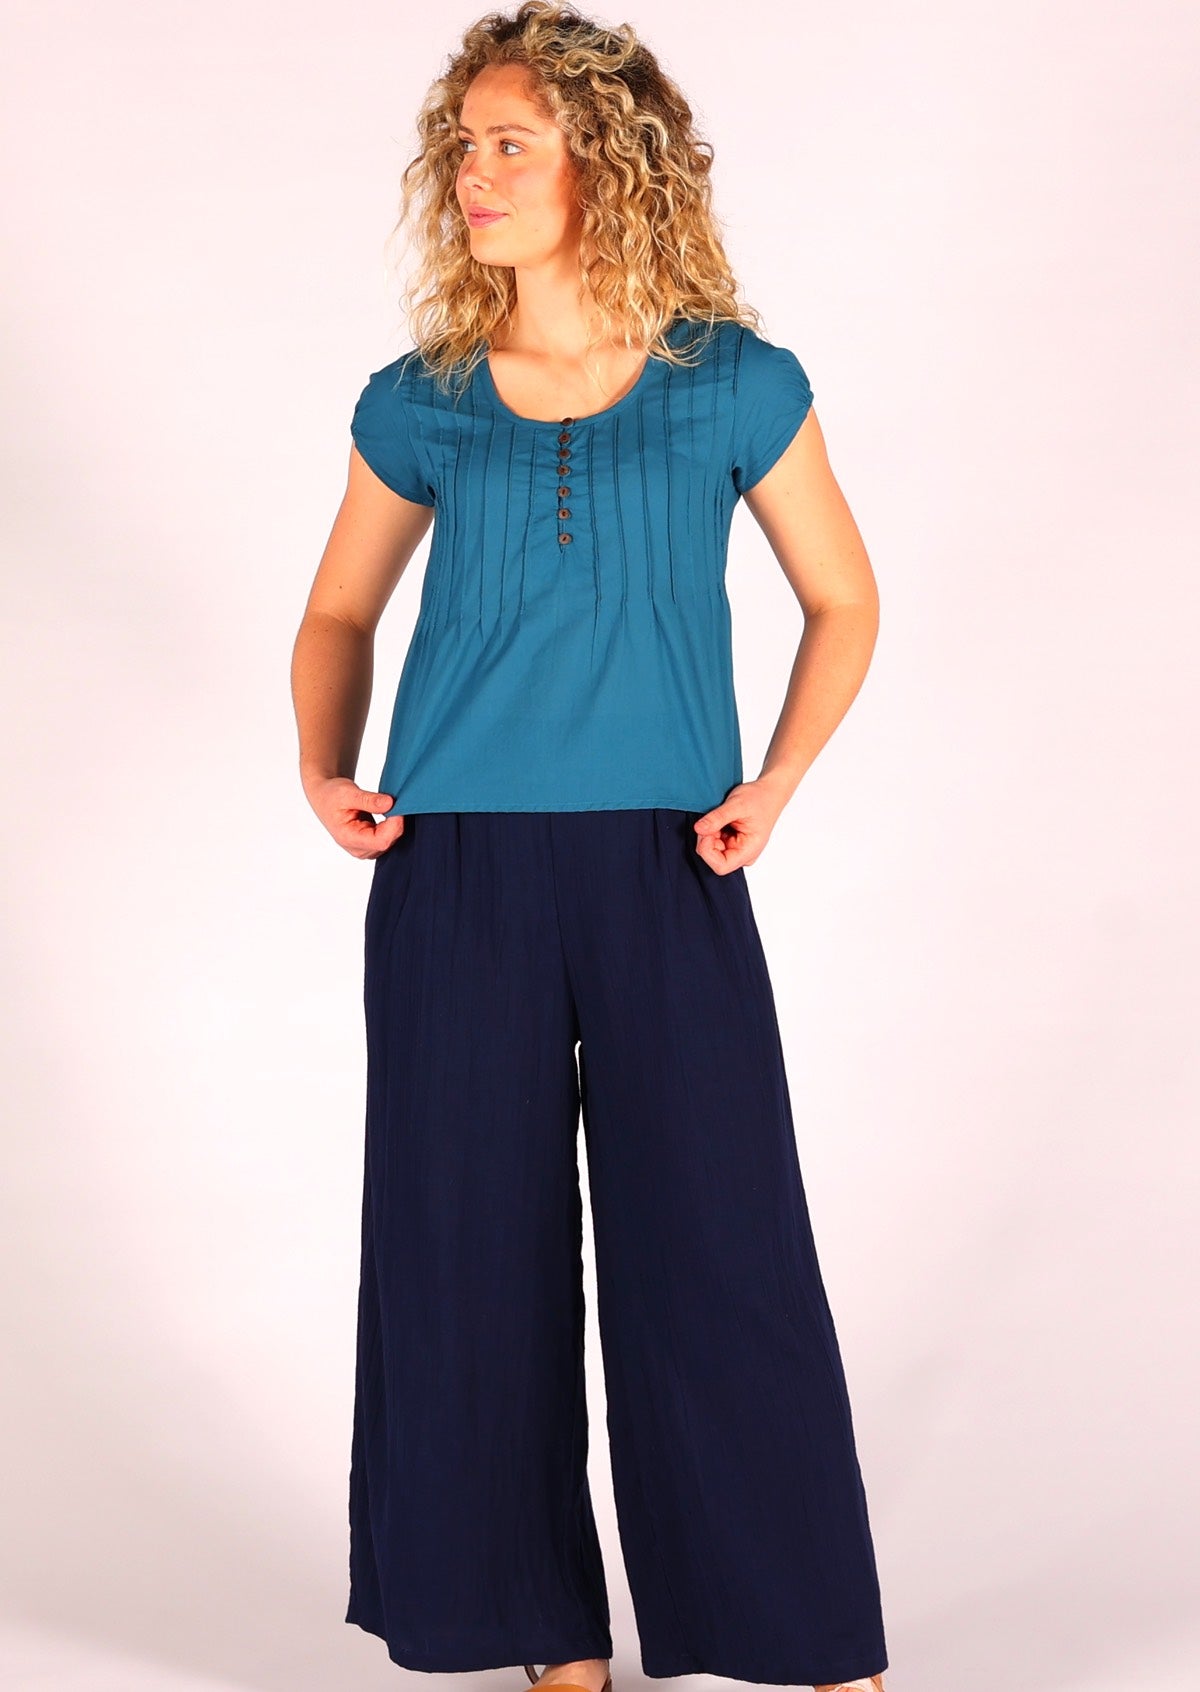 High waisted wide leg pants made from double cotton in dark blue